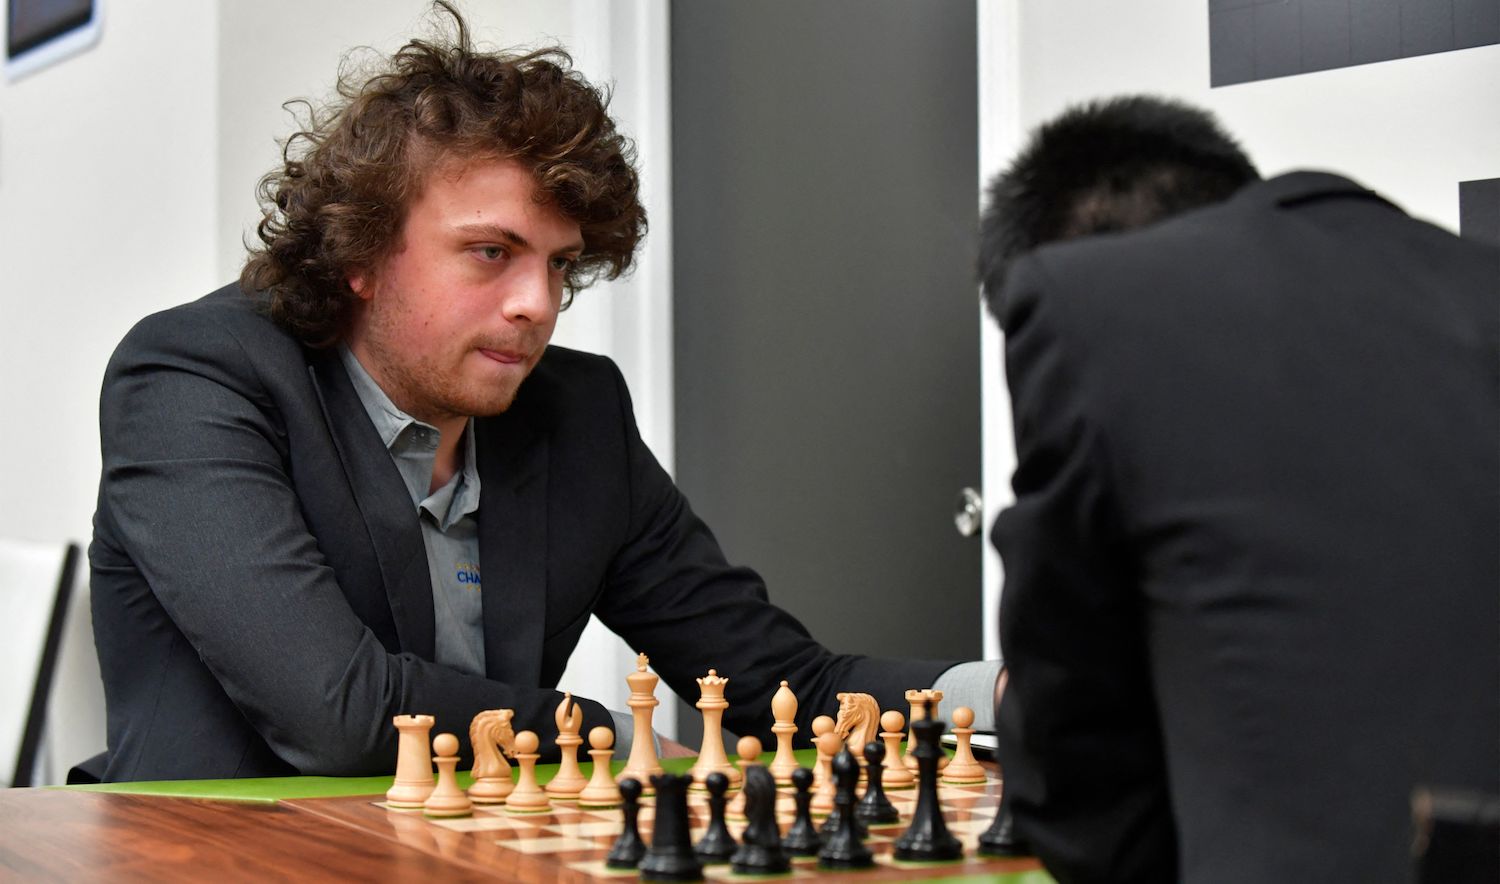 US international grandmaster Hans Niemann waits his turn to move during a second-round chess game against Jeffery Xiong on the second day of the Saint Louis Chess Club Fall Chess Classic in St. Louis, Missouri, on October 6, 2022. - Niemann said on October 5 that he "won't back down," after the chess platform chess.com reported he has "probably cheated more than 100 times" in online games. (Photo by Tim Vizer / AFP) (Photo by TIM VIZER/AFP via Getty Images)